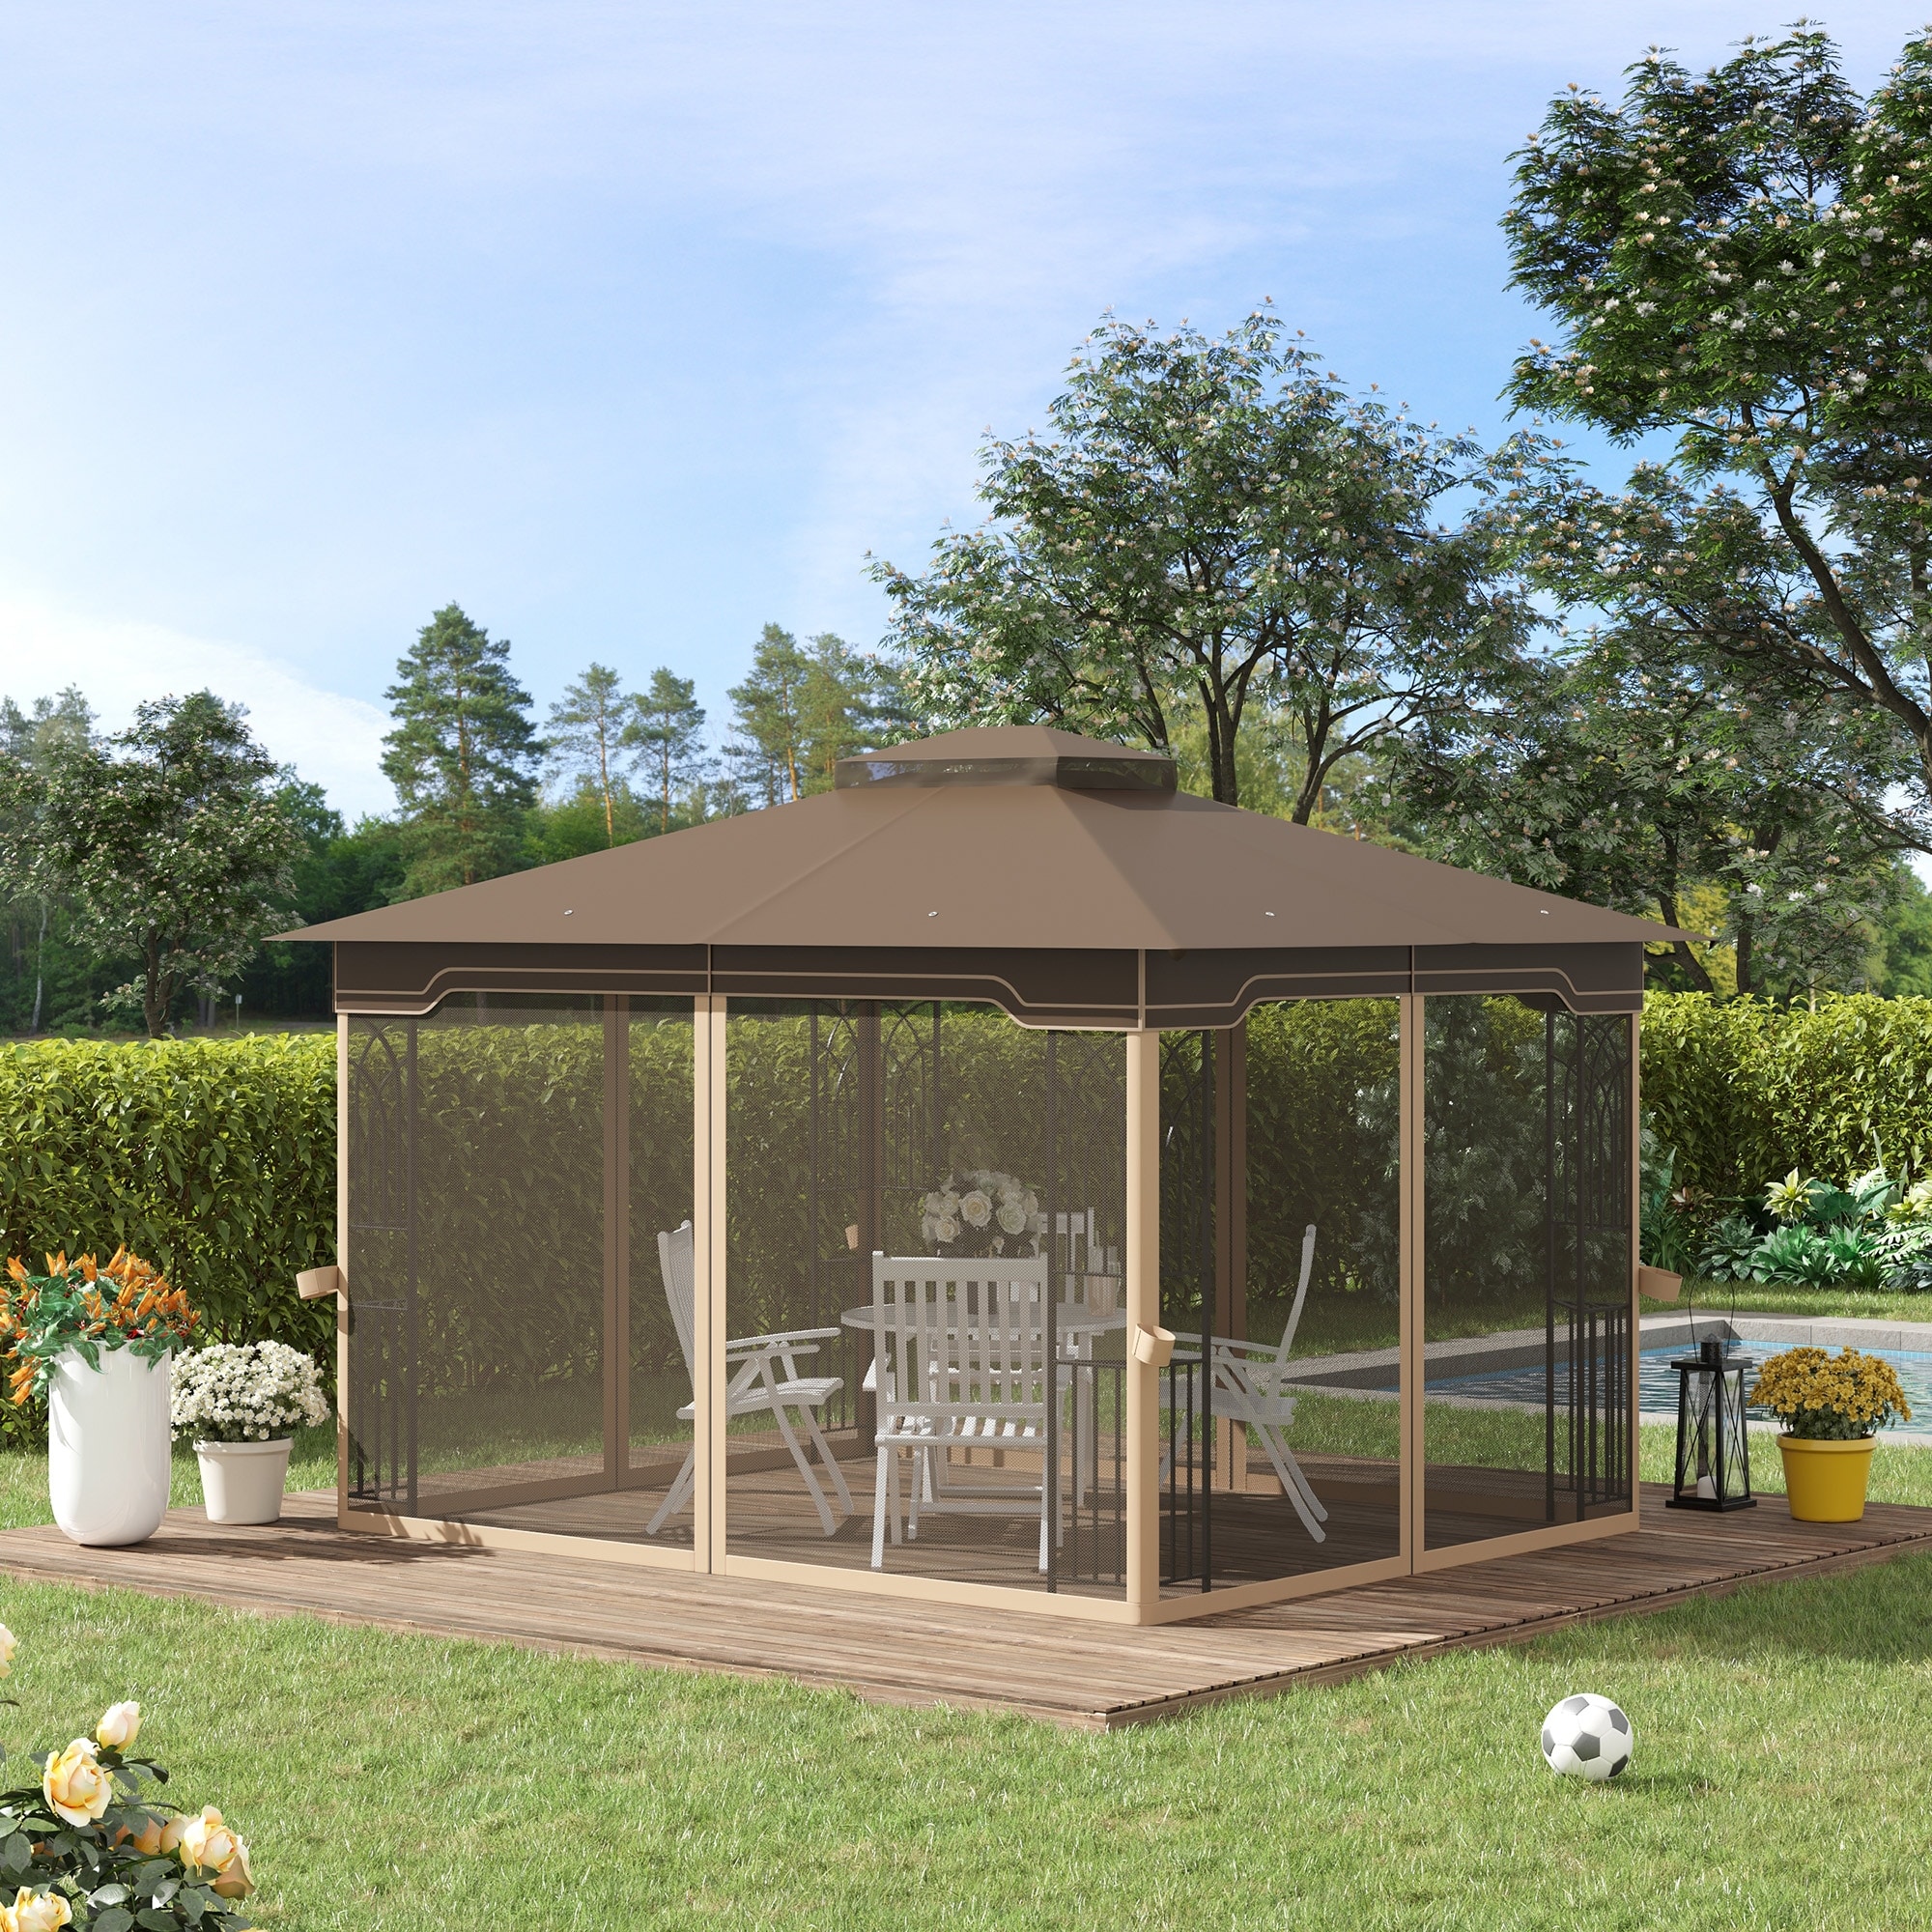 Outsunny  12 x 10 Patio Gazebo Outdoor Canopy Shelter with Double Tier Roof and Netting Sidewalls for Garden, Lawn, Backyard